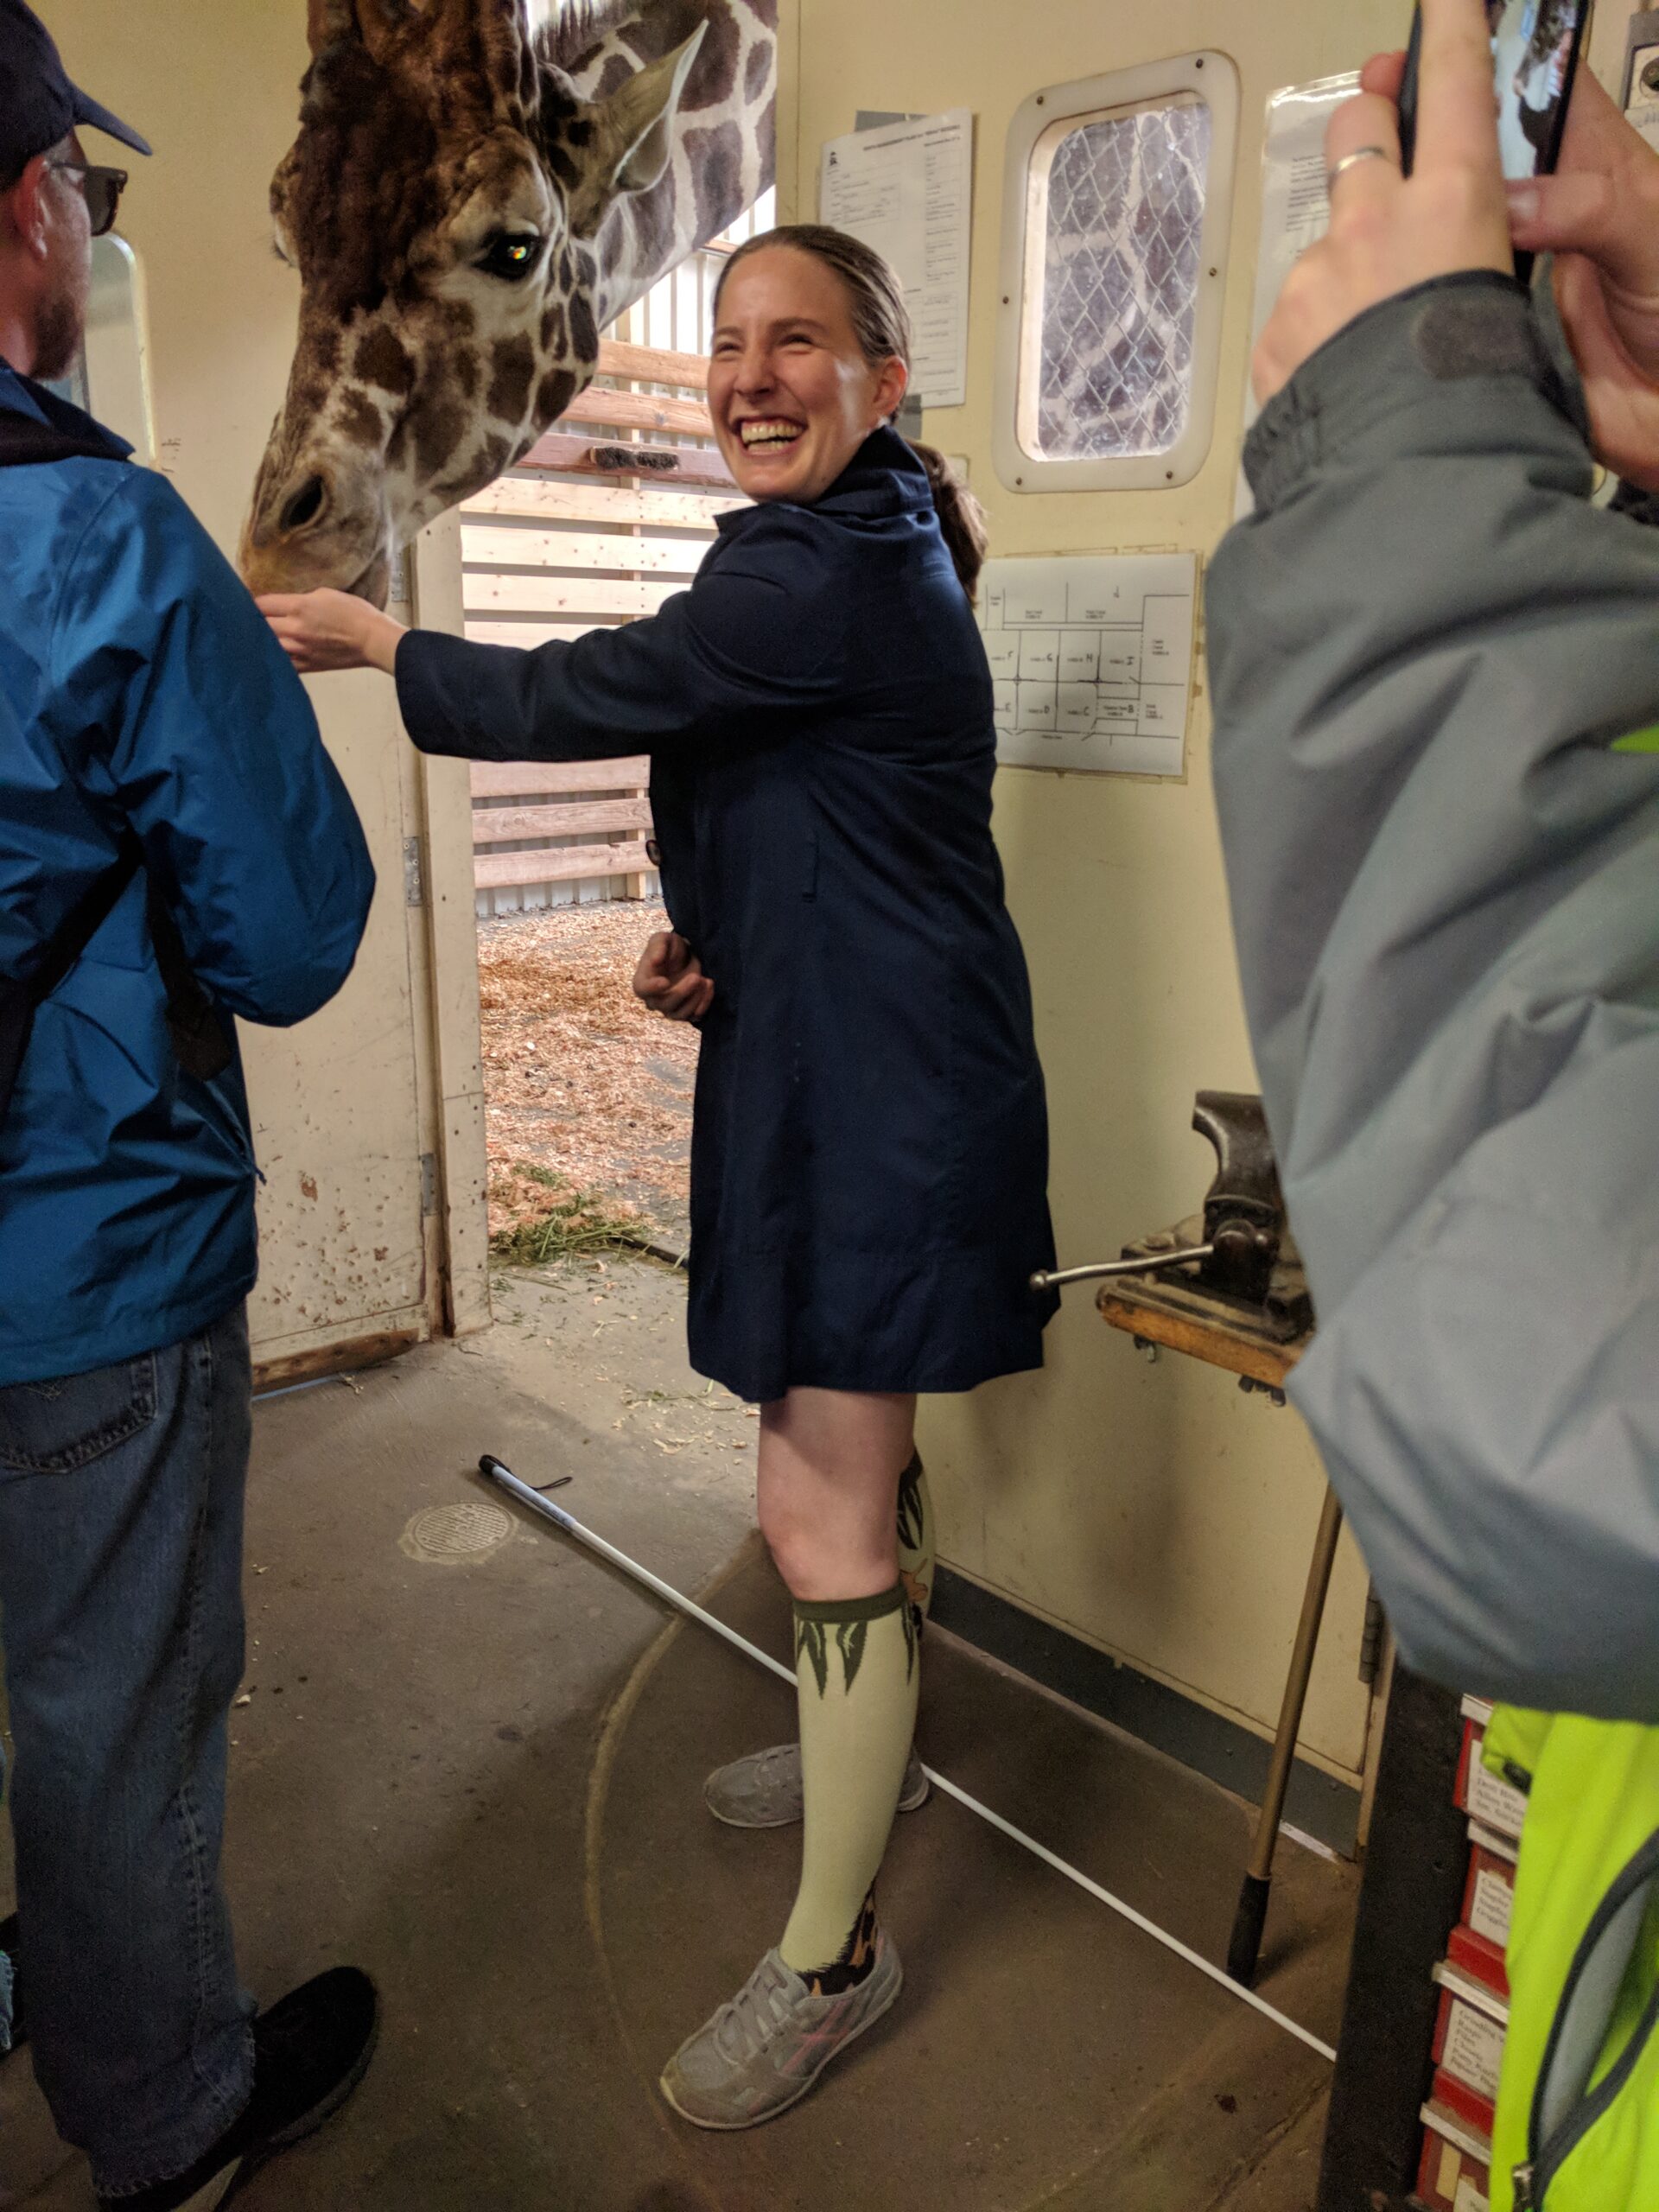 Cynthia is feeding a live giraffe, which leans its head down to eat from her hand. Cynthia is laughing out loud, and her expression is full of excitement with a hint of unease. She is surrounded by a zookeeper and a friend, who is also taking a picture of the moment. Cynthia wears giraffe socks, and her cane lies at her feet.